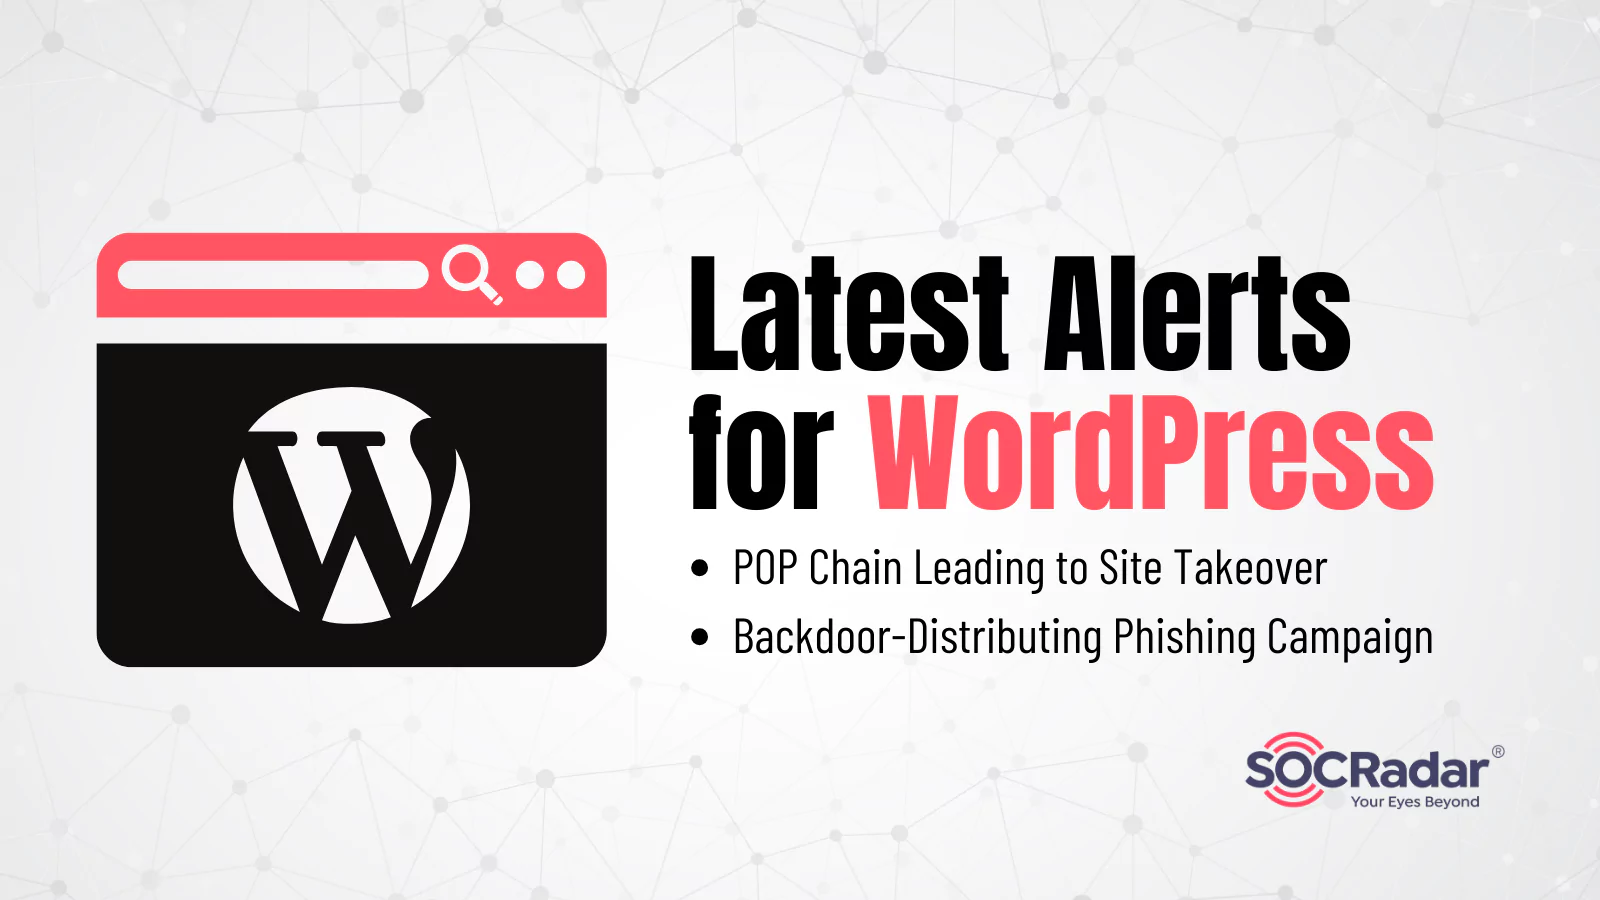 SOCRadar® Cyber Intelligence Inc. | Latest Alerts for WordPress: POP Chain Leading to Site Takeover, Backdoor-Distributing Phishing Campaign